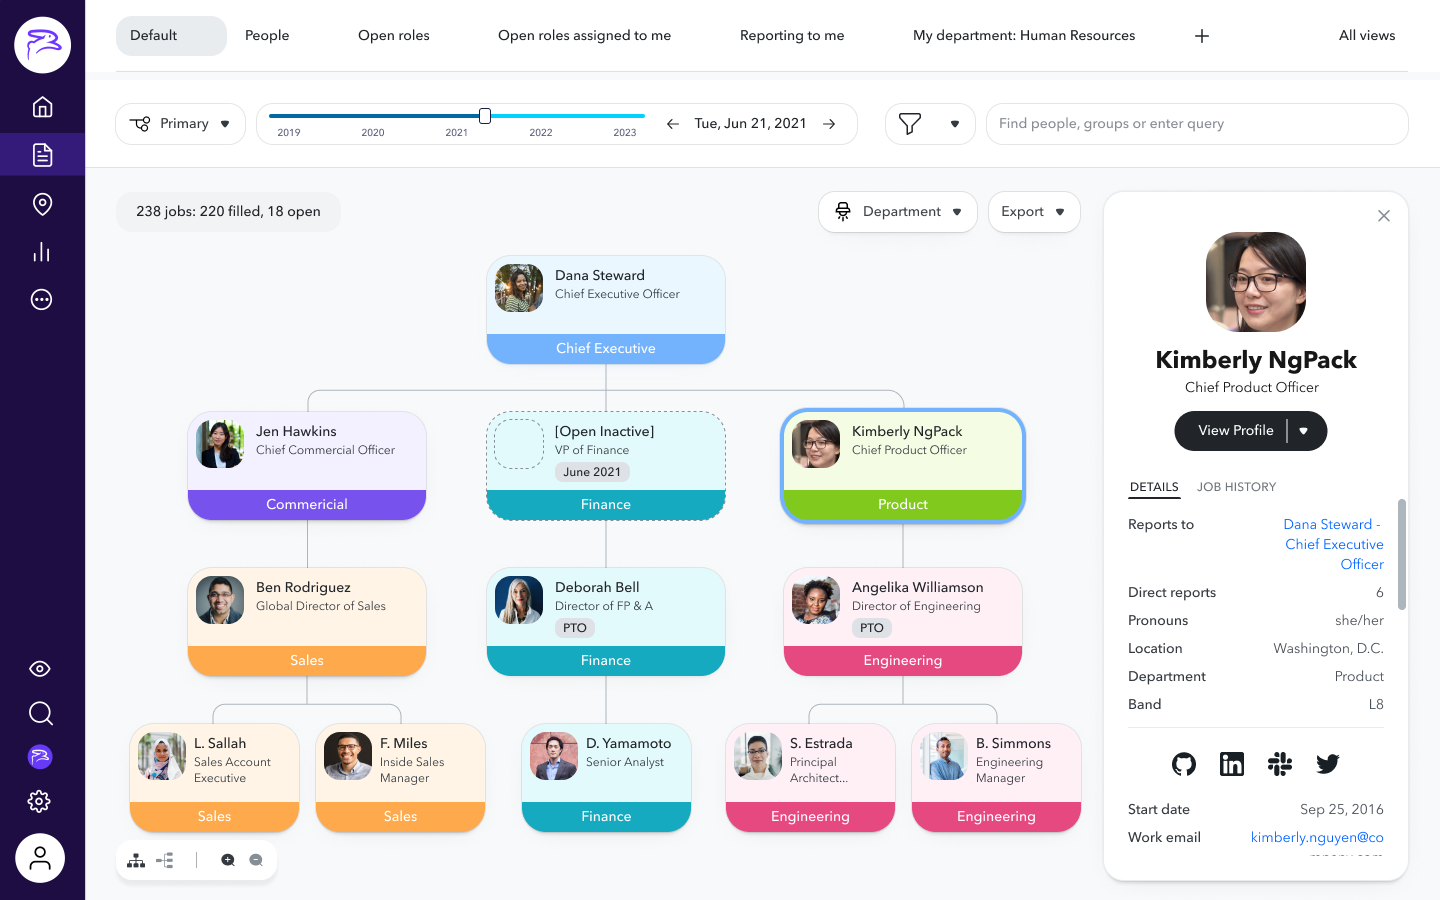 Rich employee profiles: Drive connections across your employee base while humanizing your people data